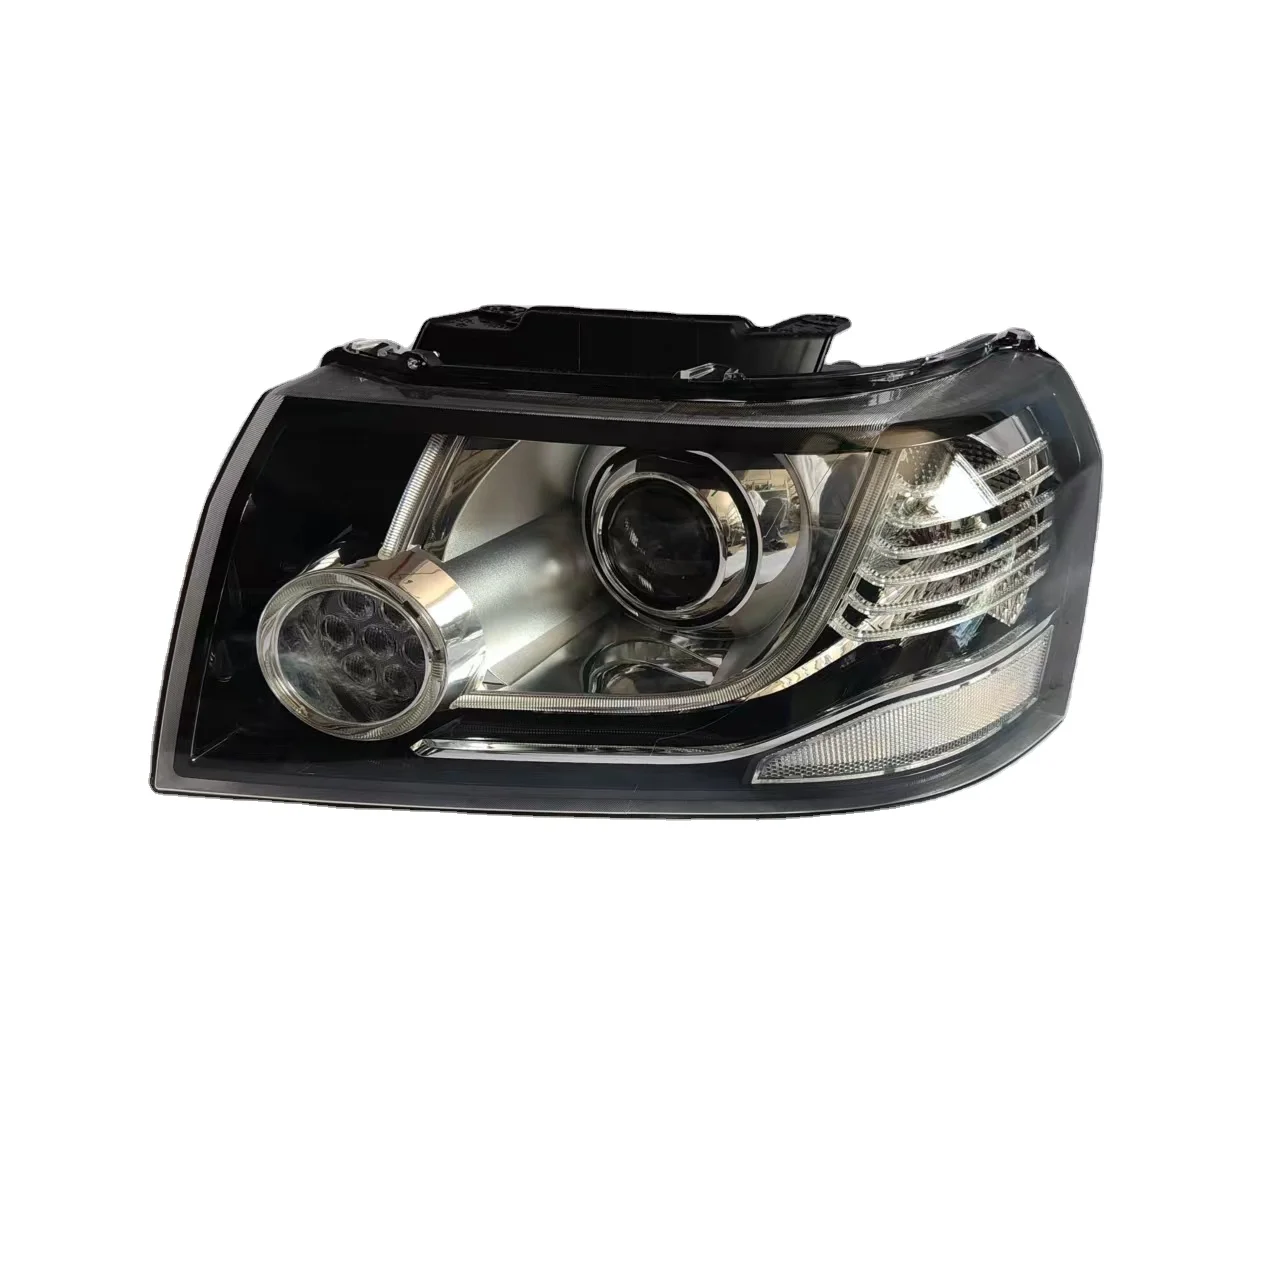 

Manufacturer's direct sales of For Land Rover vehicle lighting system Shener 2013 hernia headlights